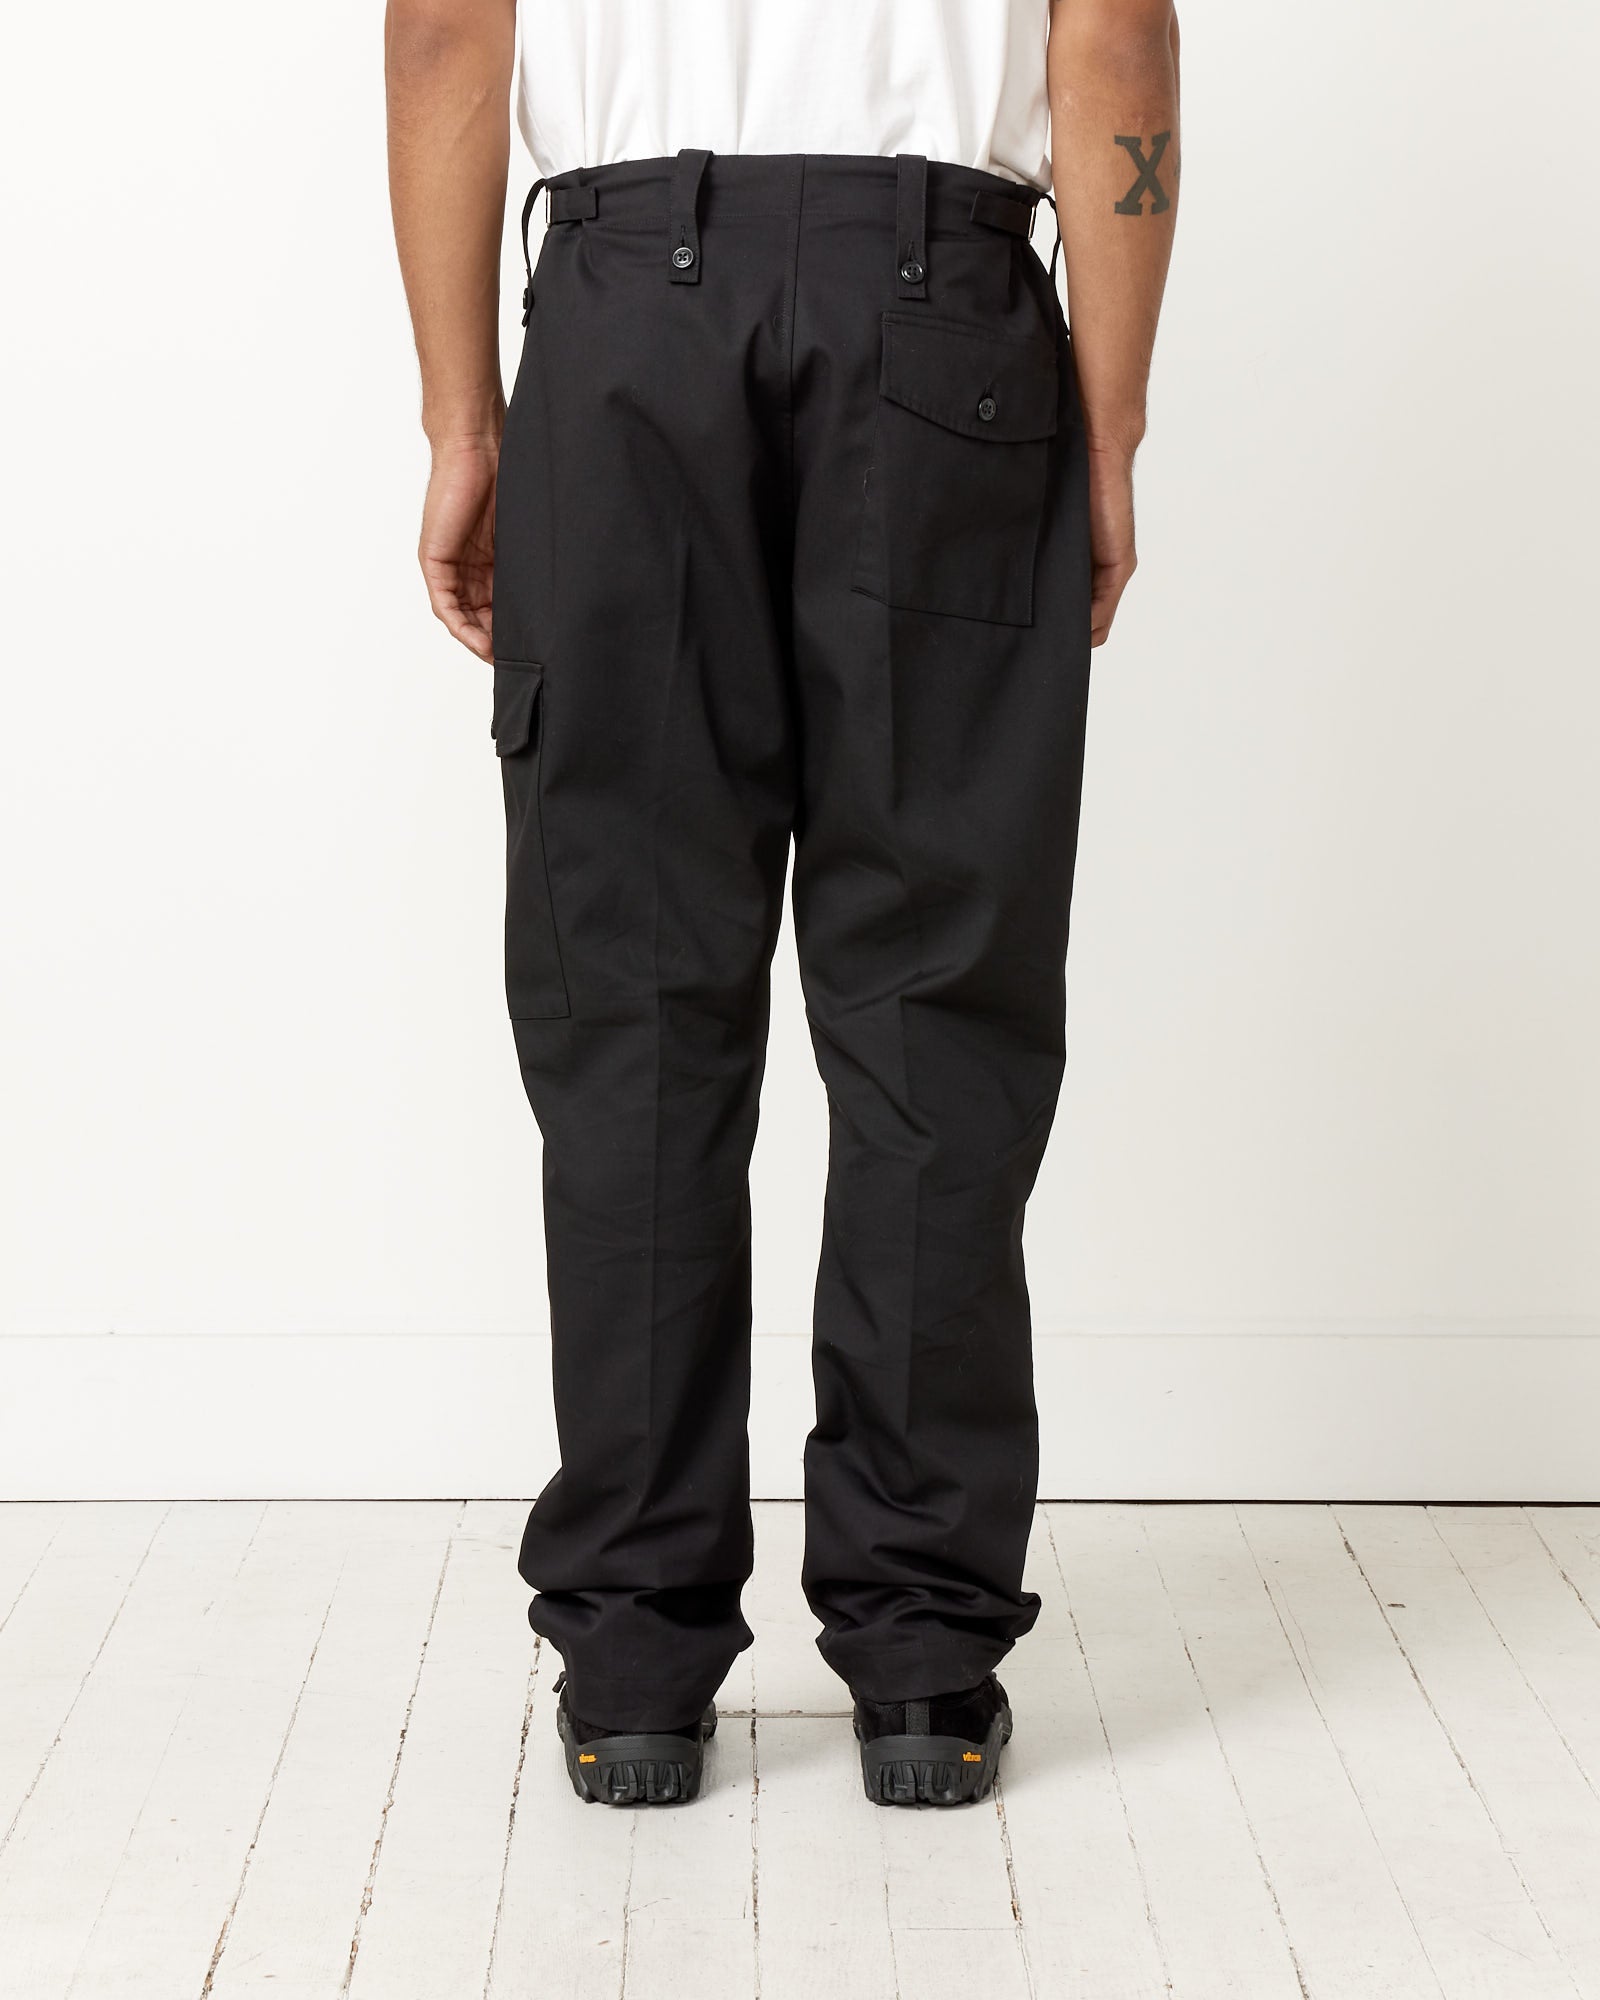 OCR Pant ECO Twill in Black